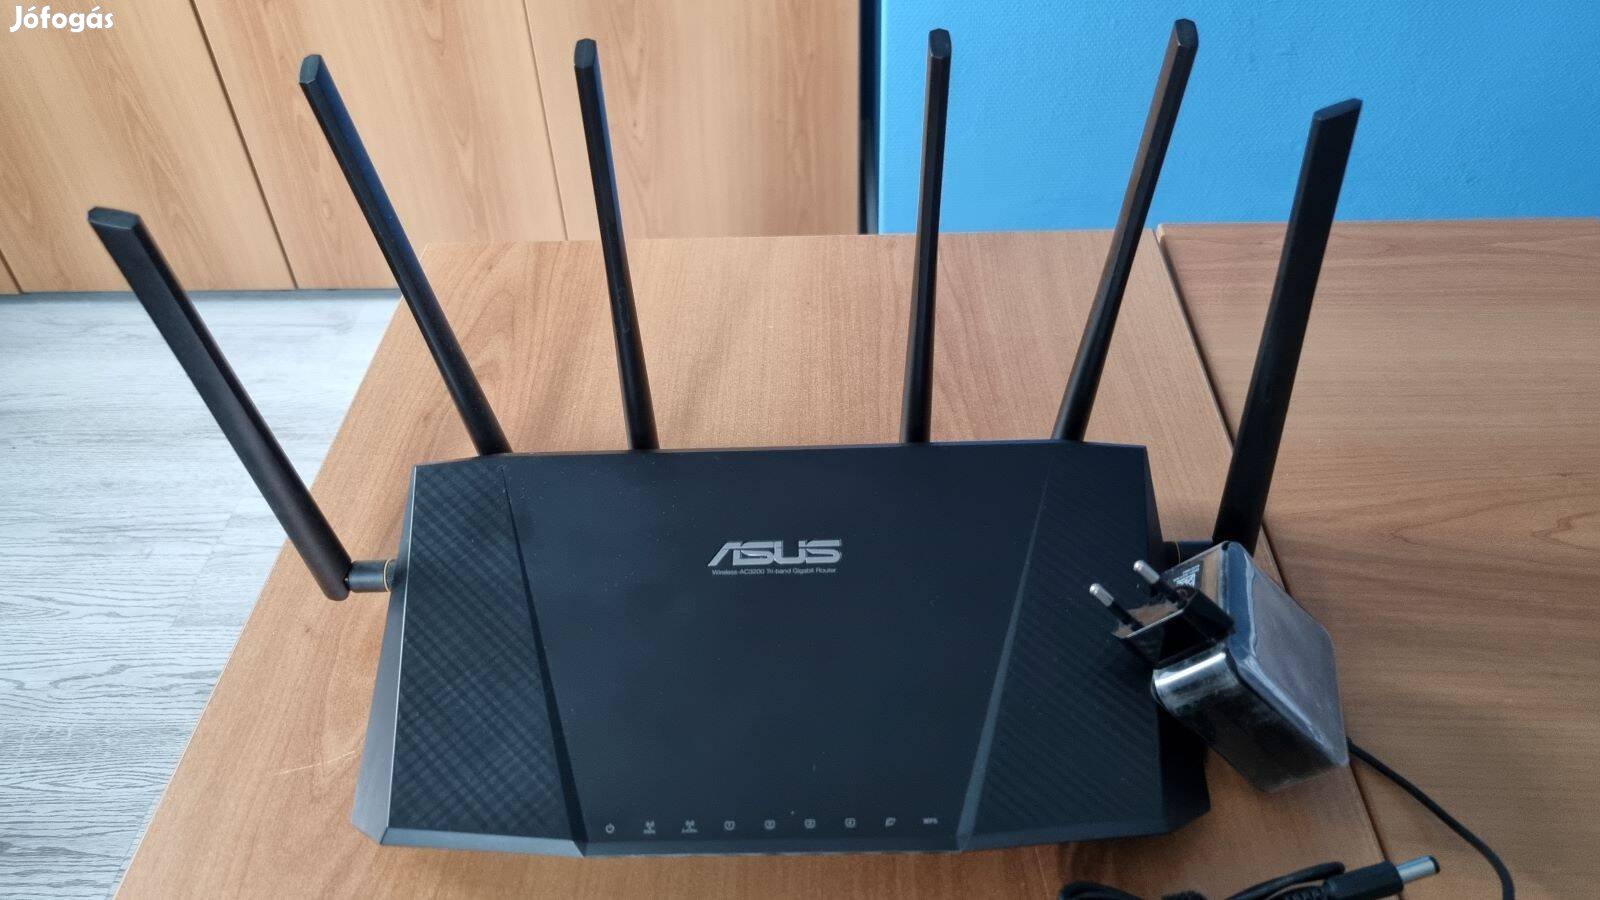 Asus RT-AC3200 wifi router